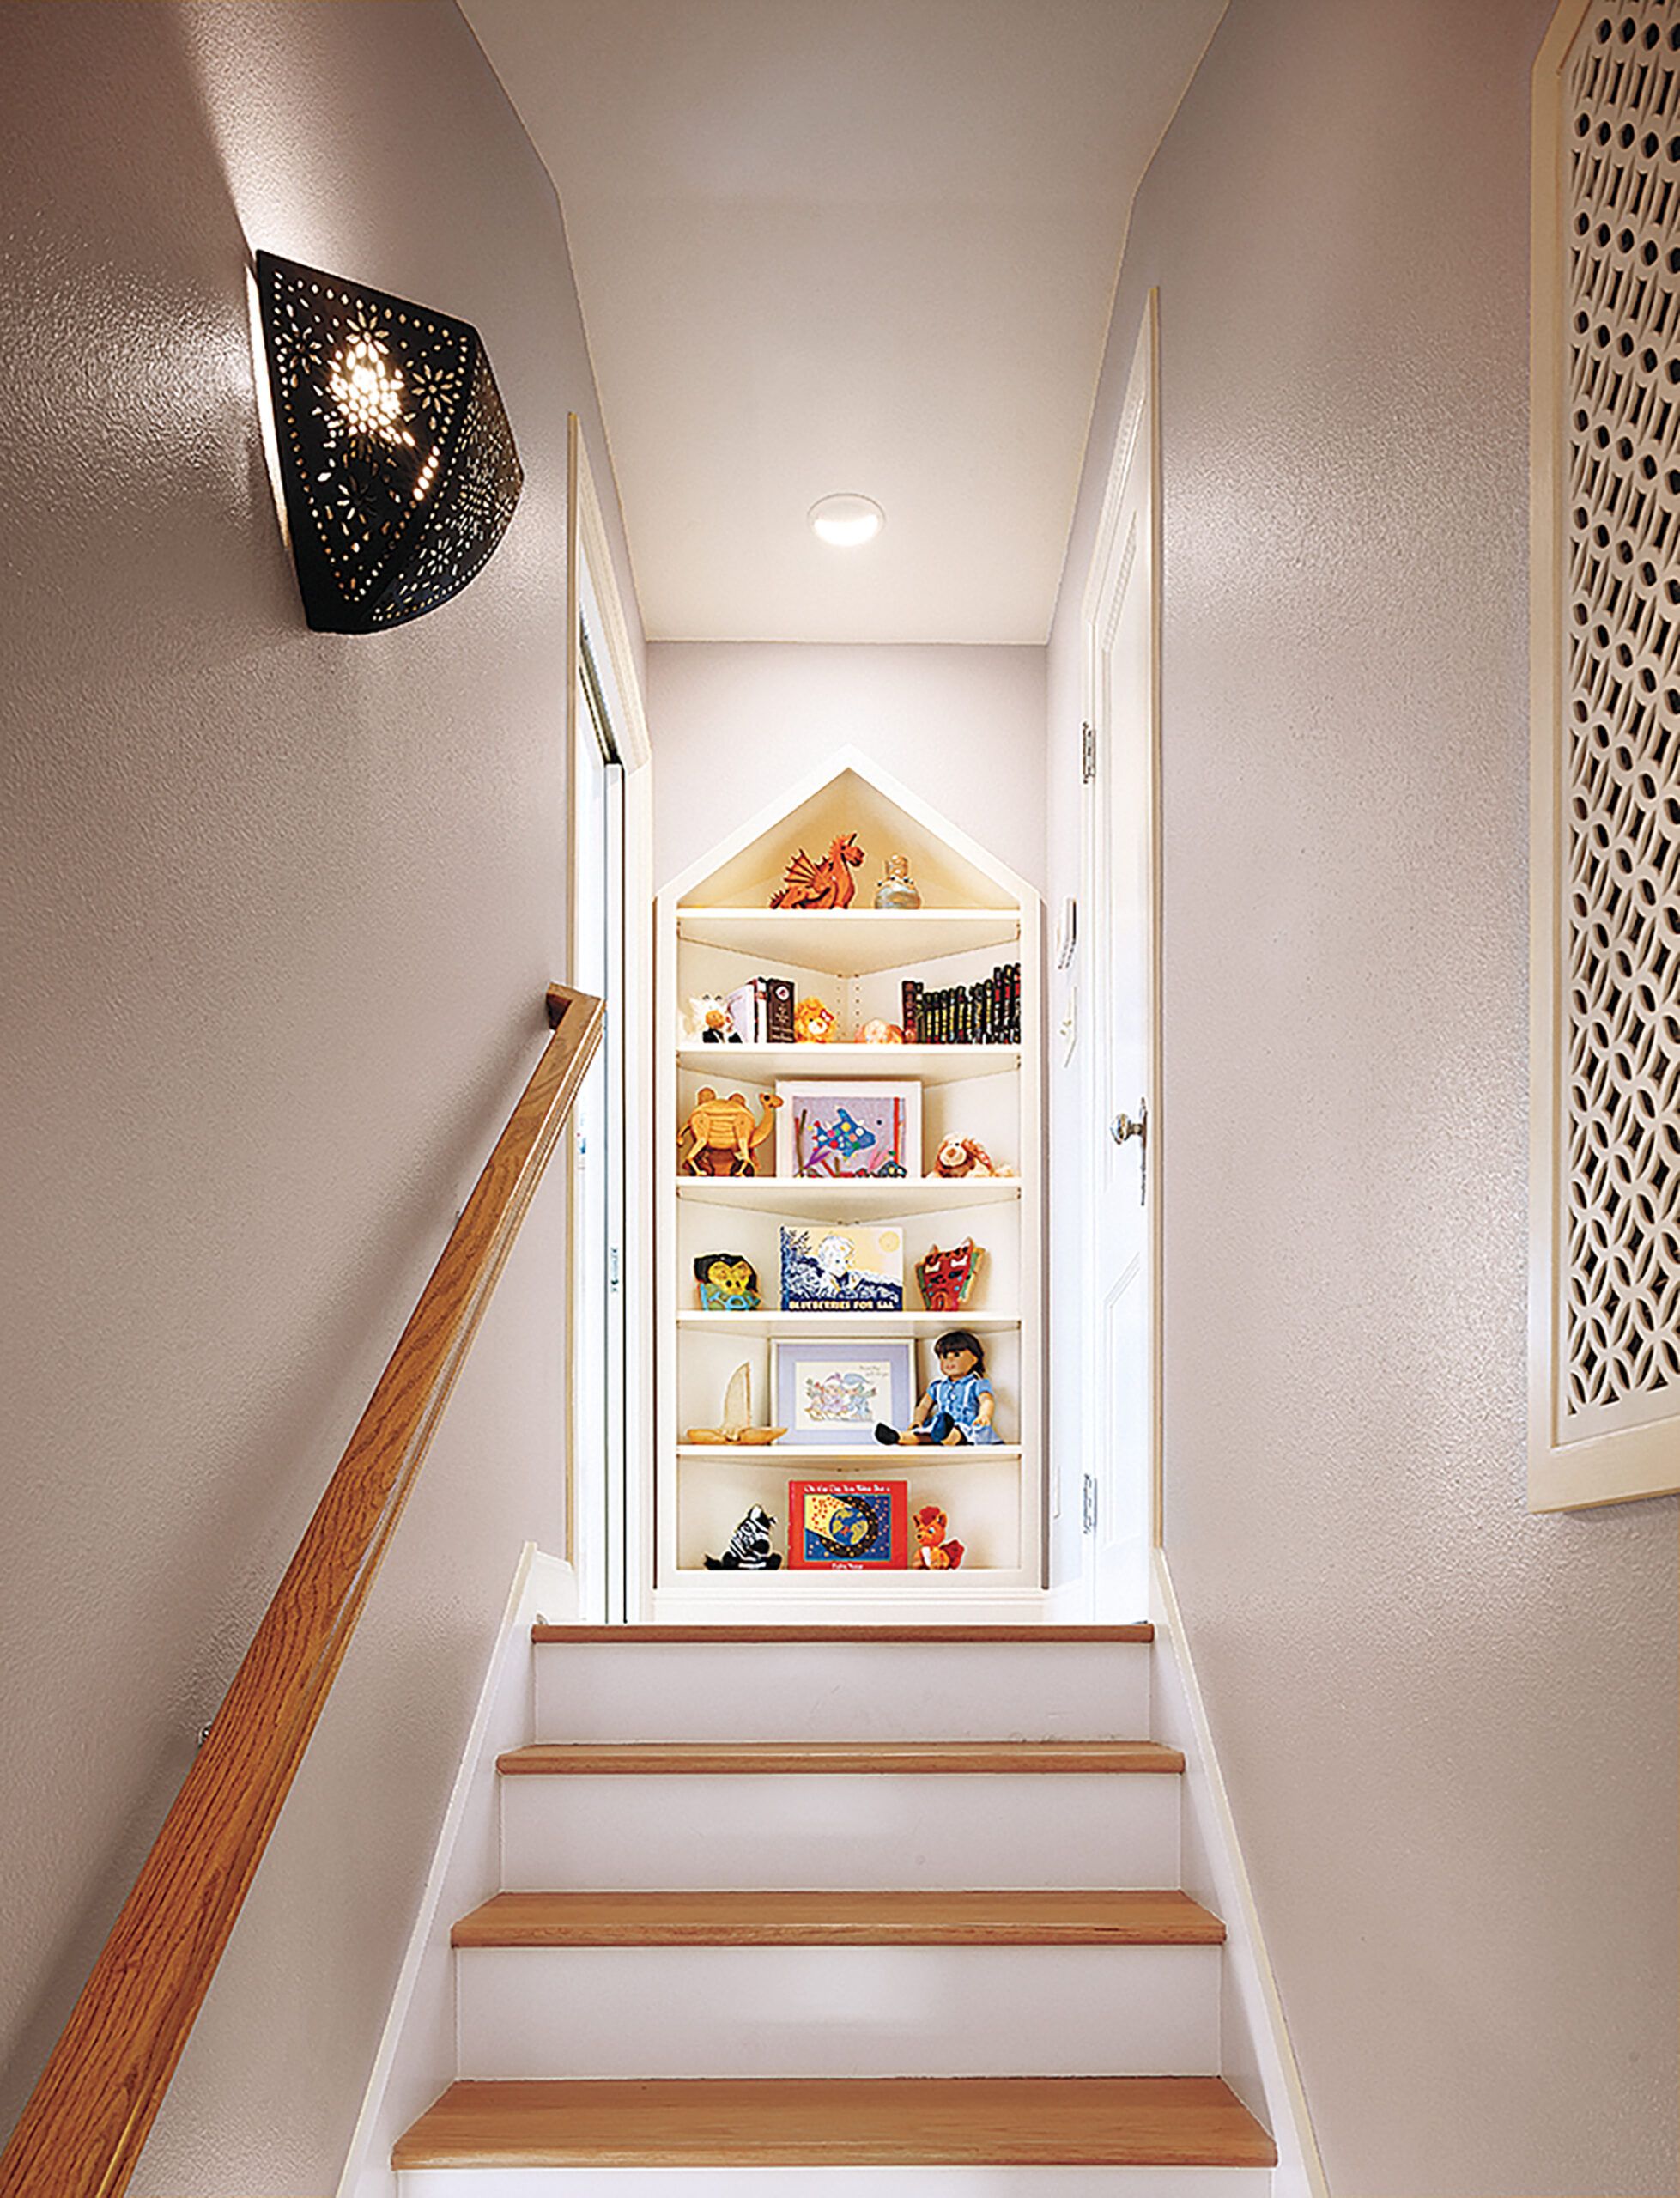 6 Clever Attic Storage Ideas to Maximize Your Attic Space